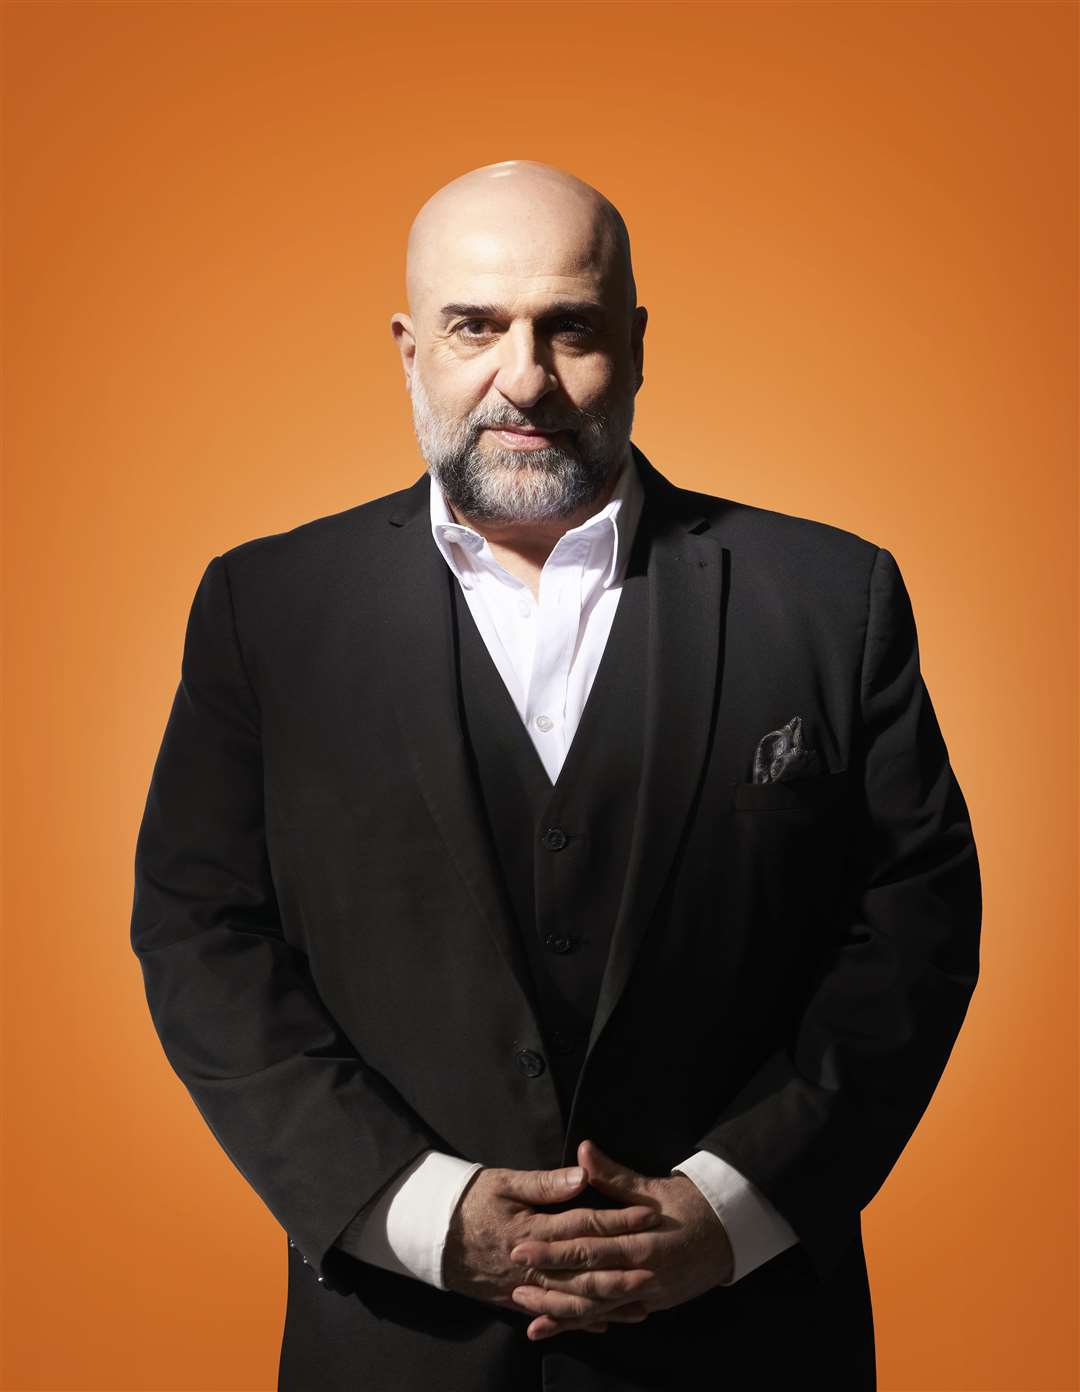 Omid Djalili's date on February 6 at Eden Court has been postponed.